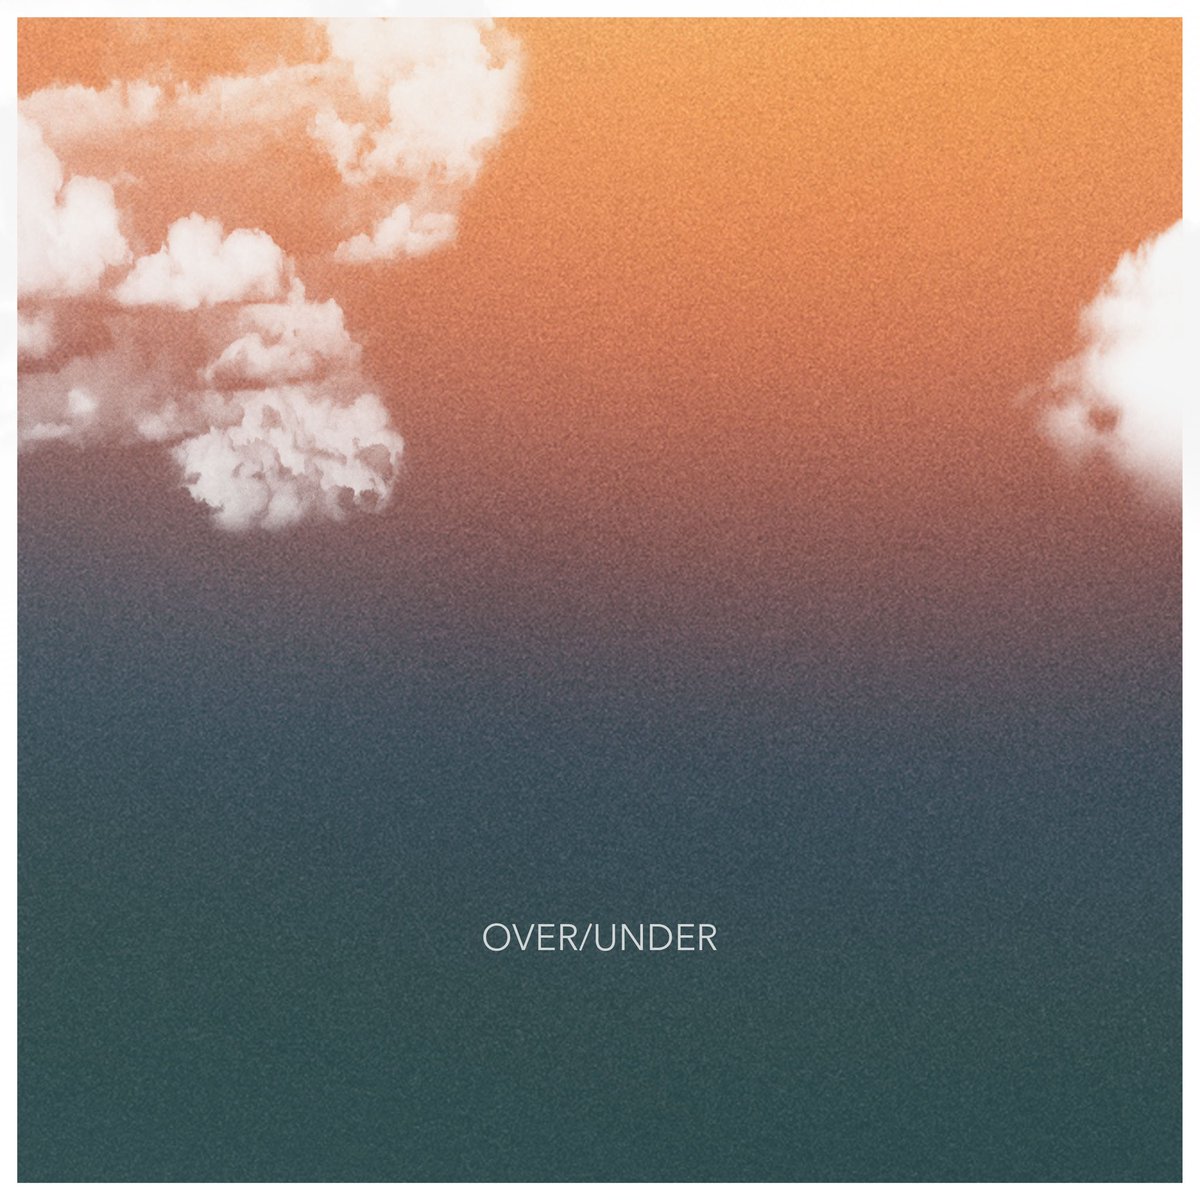 Dropping our first single from our new album today - “Over/Under” is streaming everywhere now!